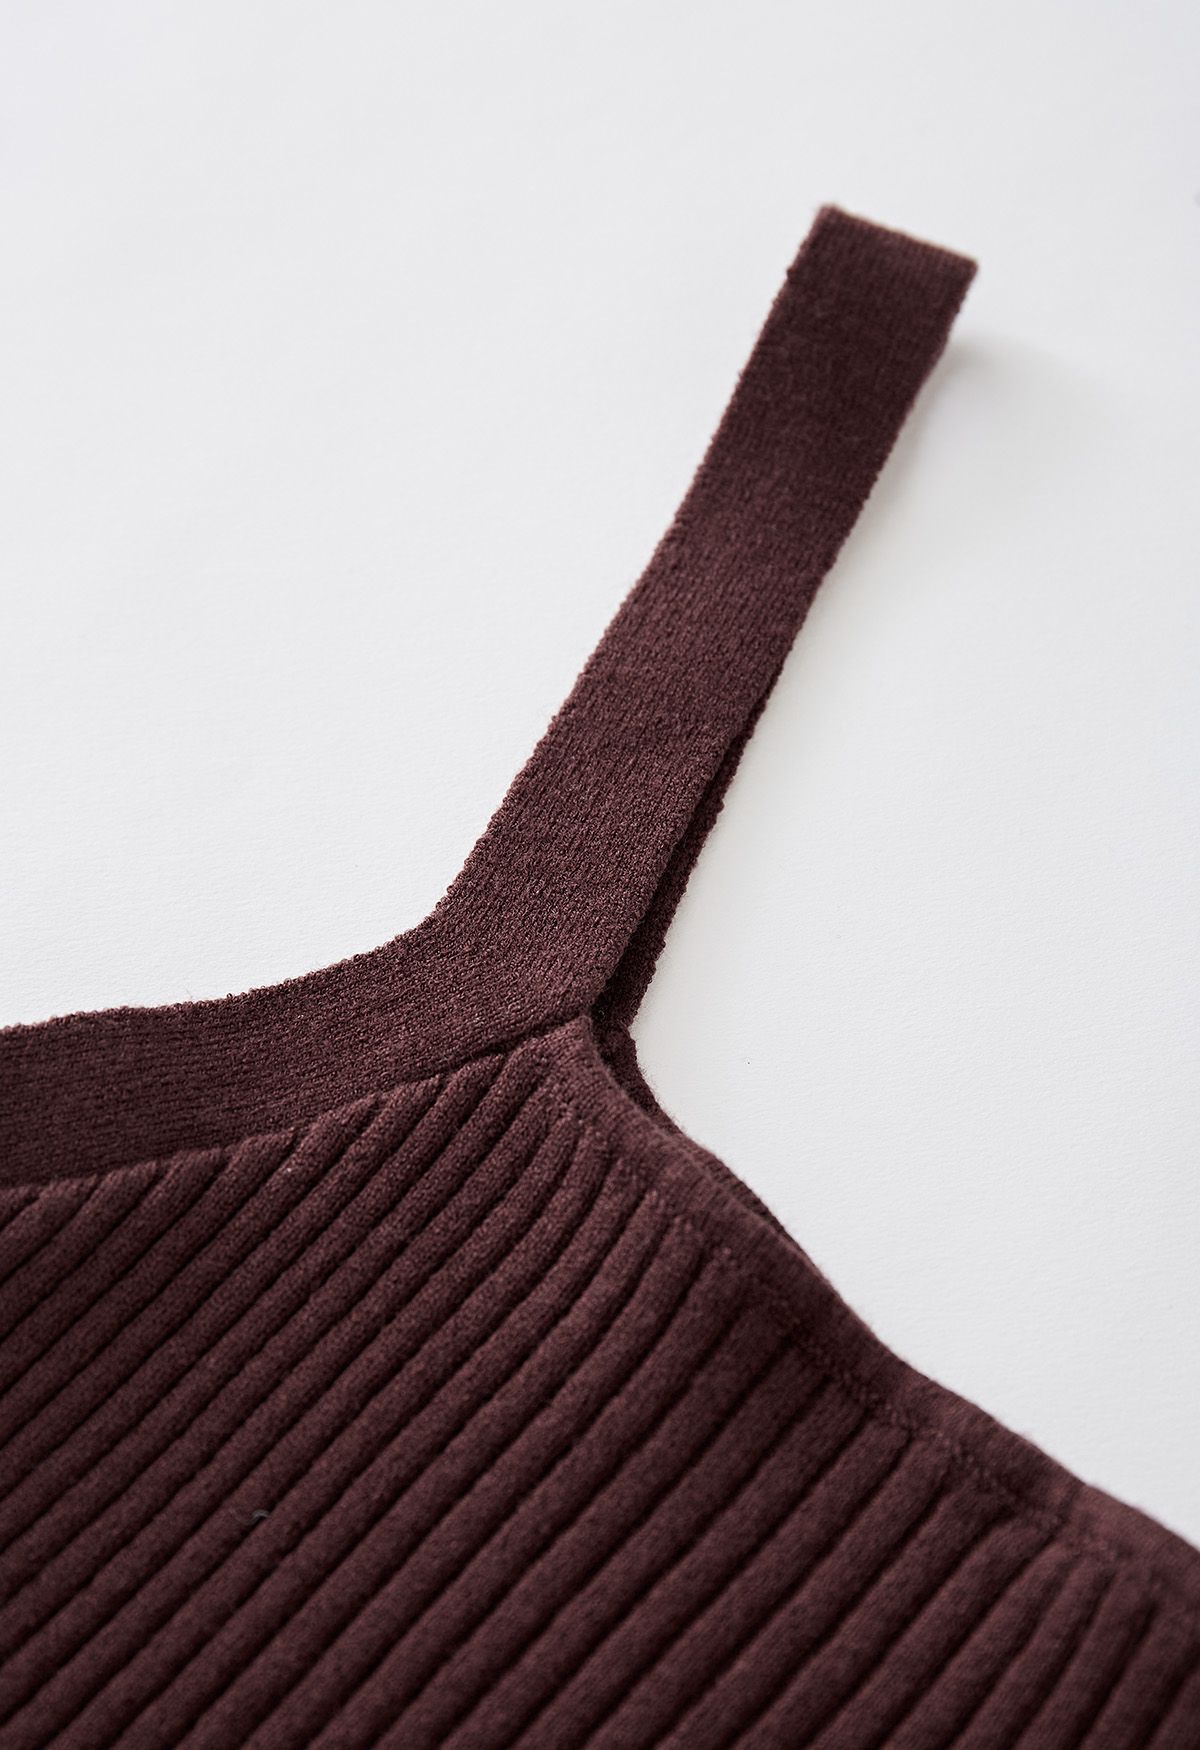 Ultra-Soft Ribbed Cami Knit Cropped Top in Brown - Retro, Indie and ...